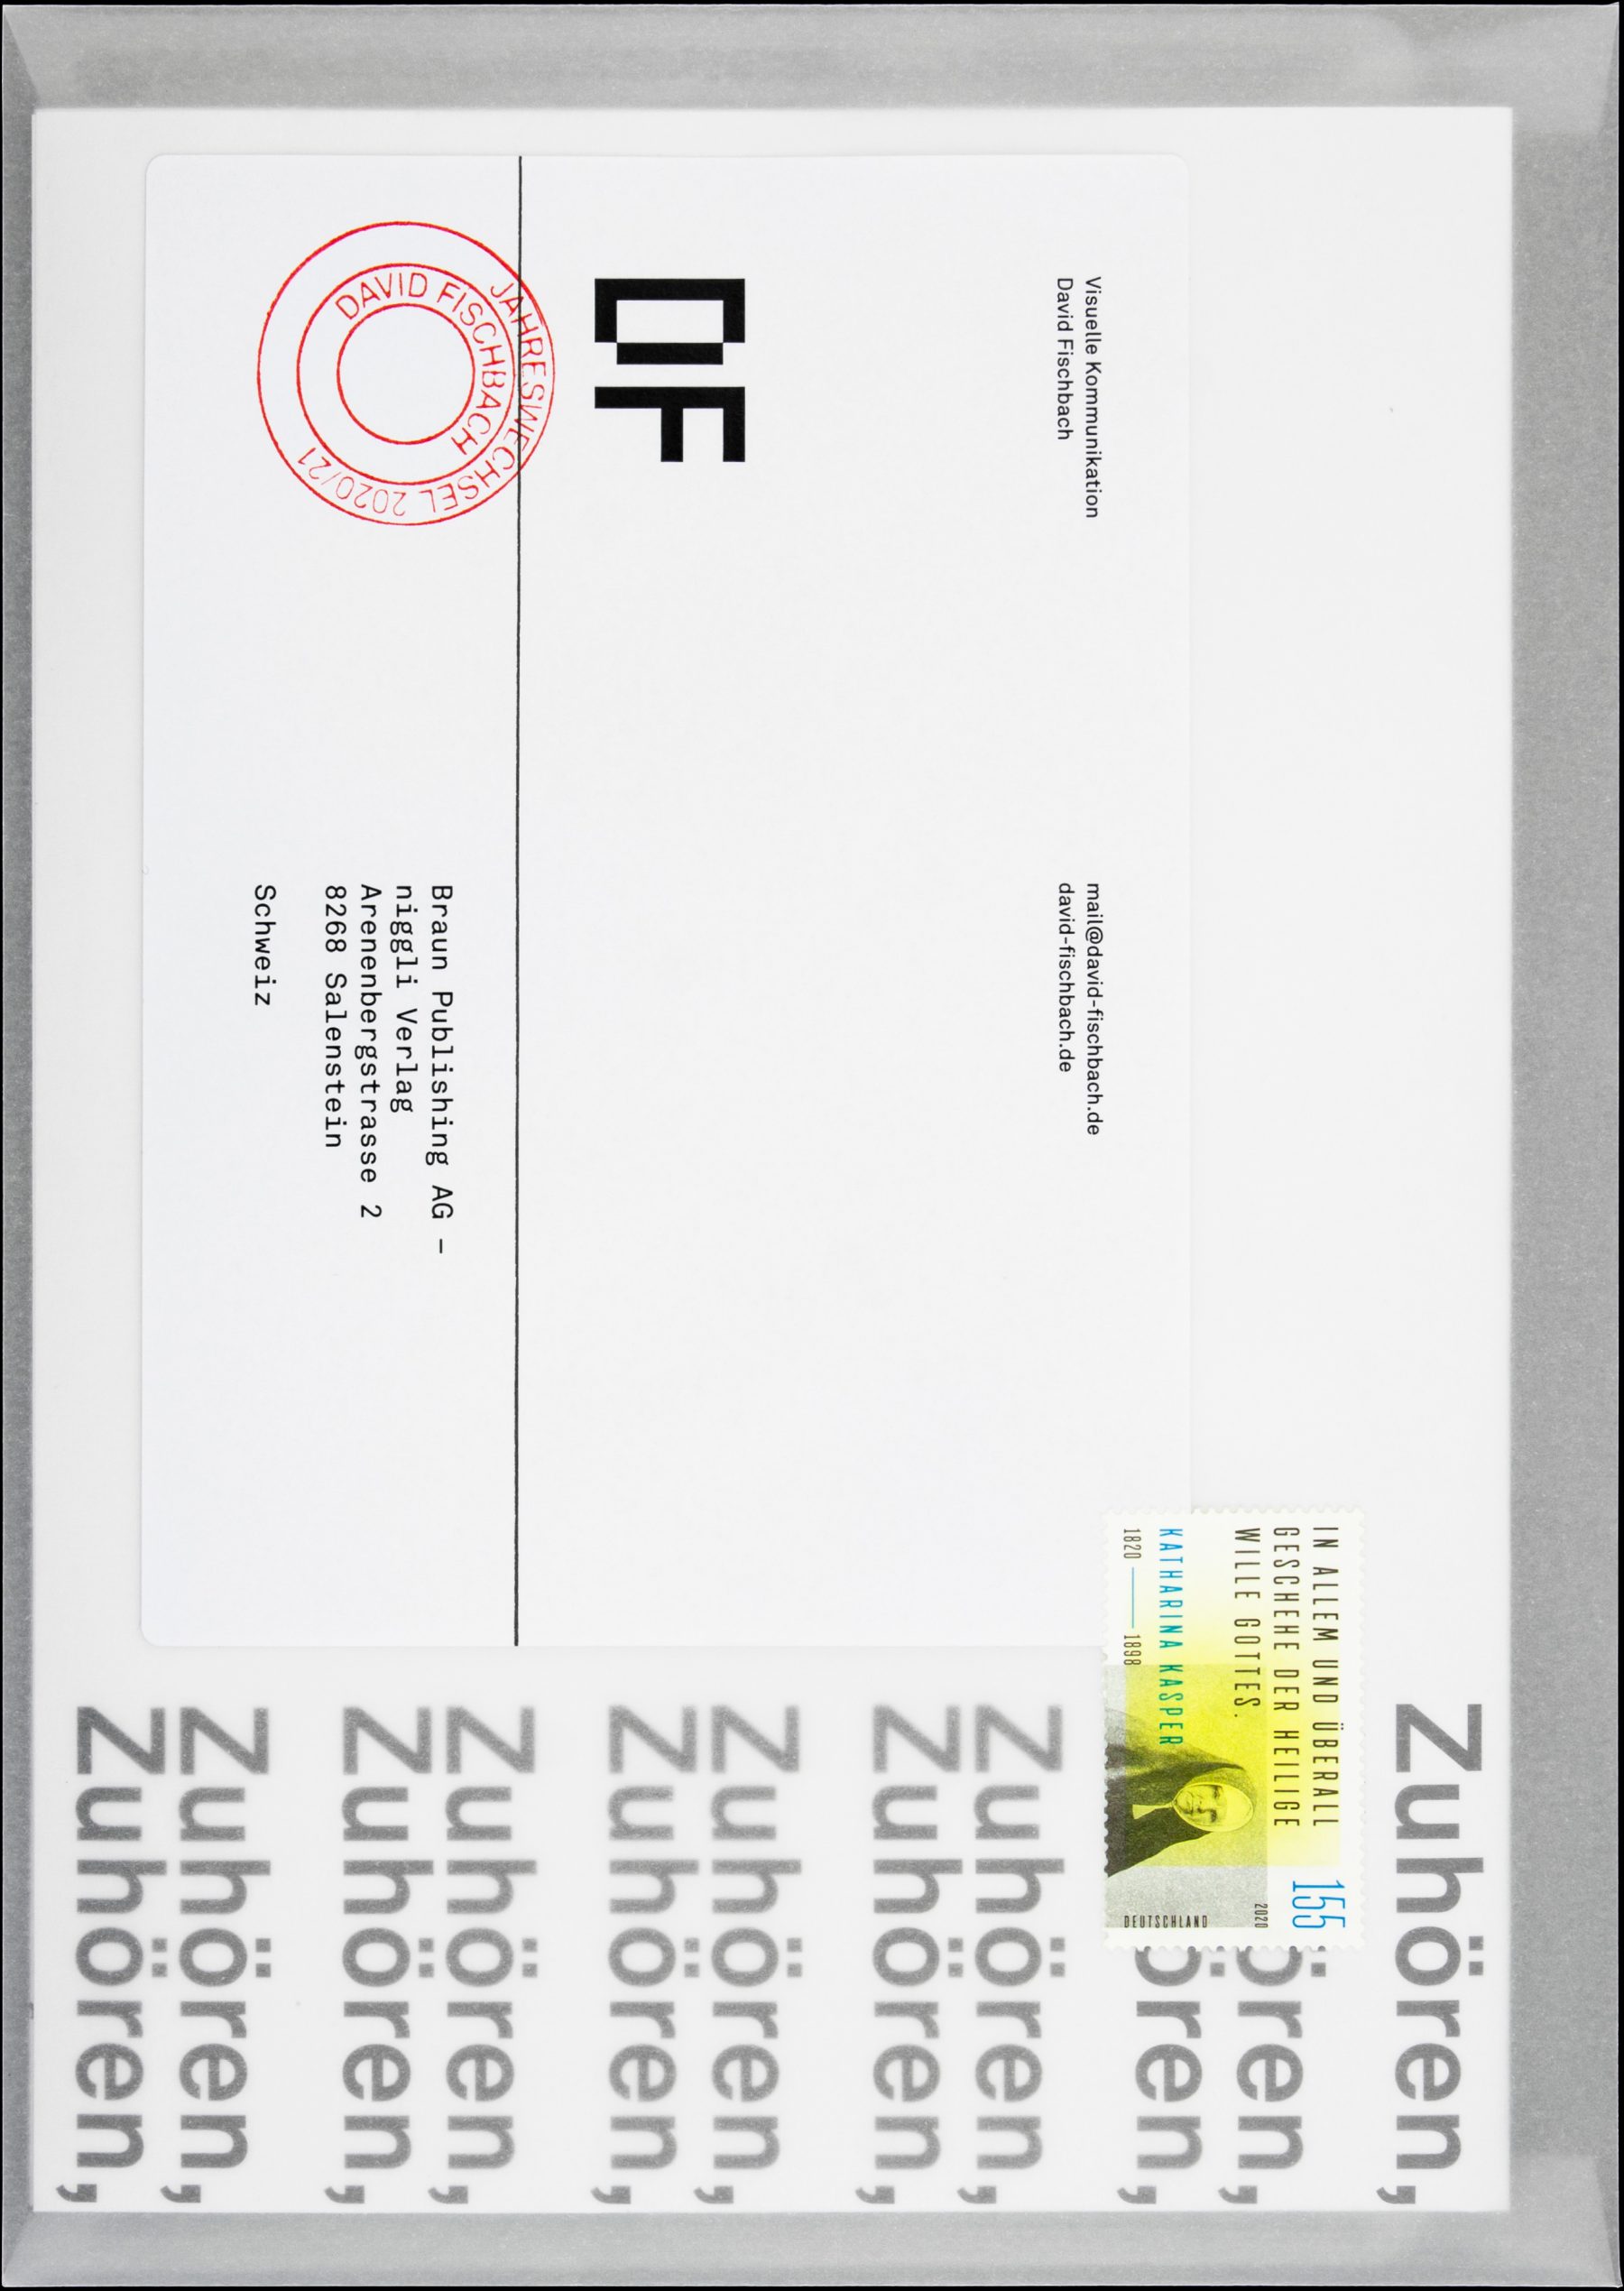 Turn of the year 2020/21, Ohne Titel, Poster, Christian Jendreiko, David Fischbach